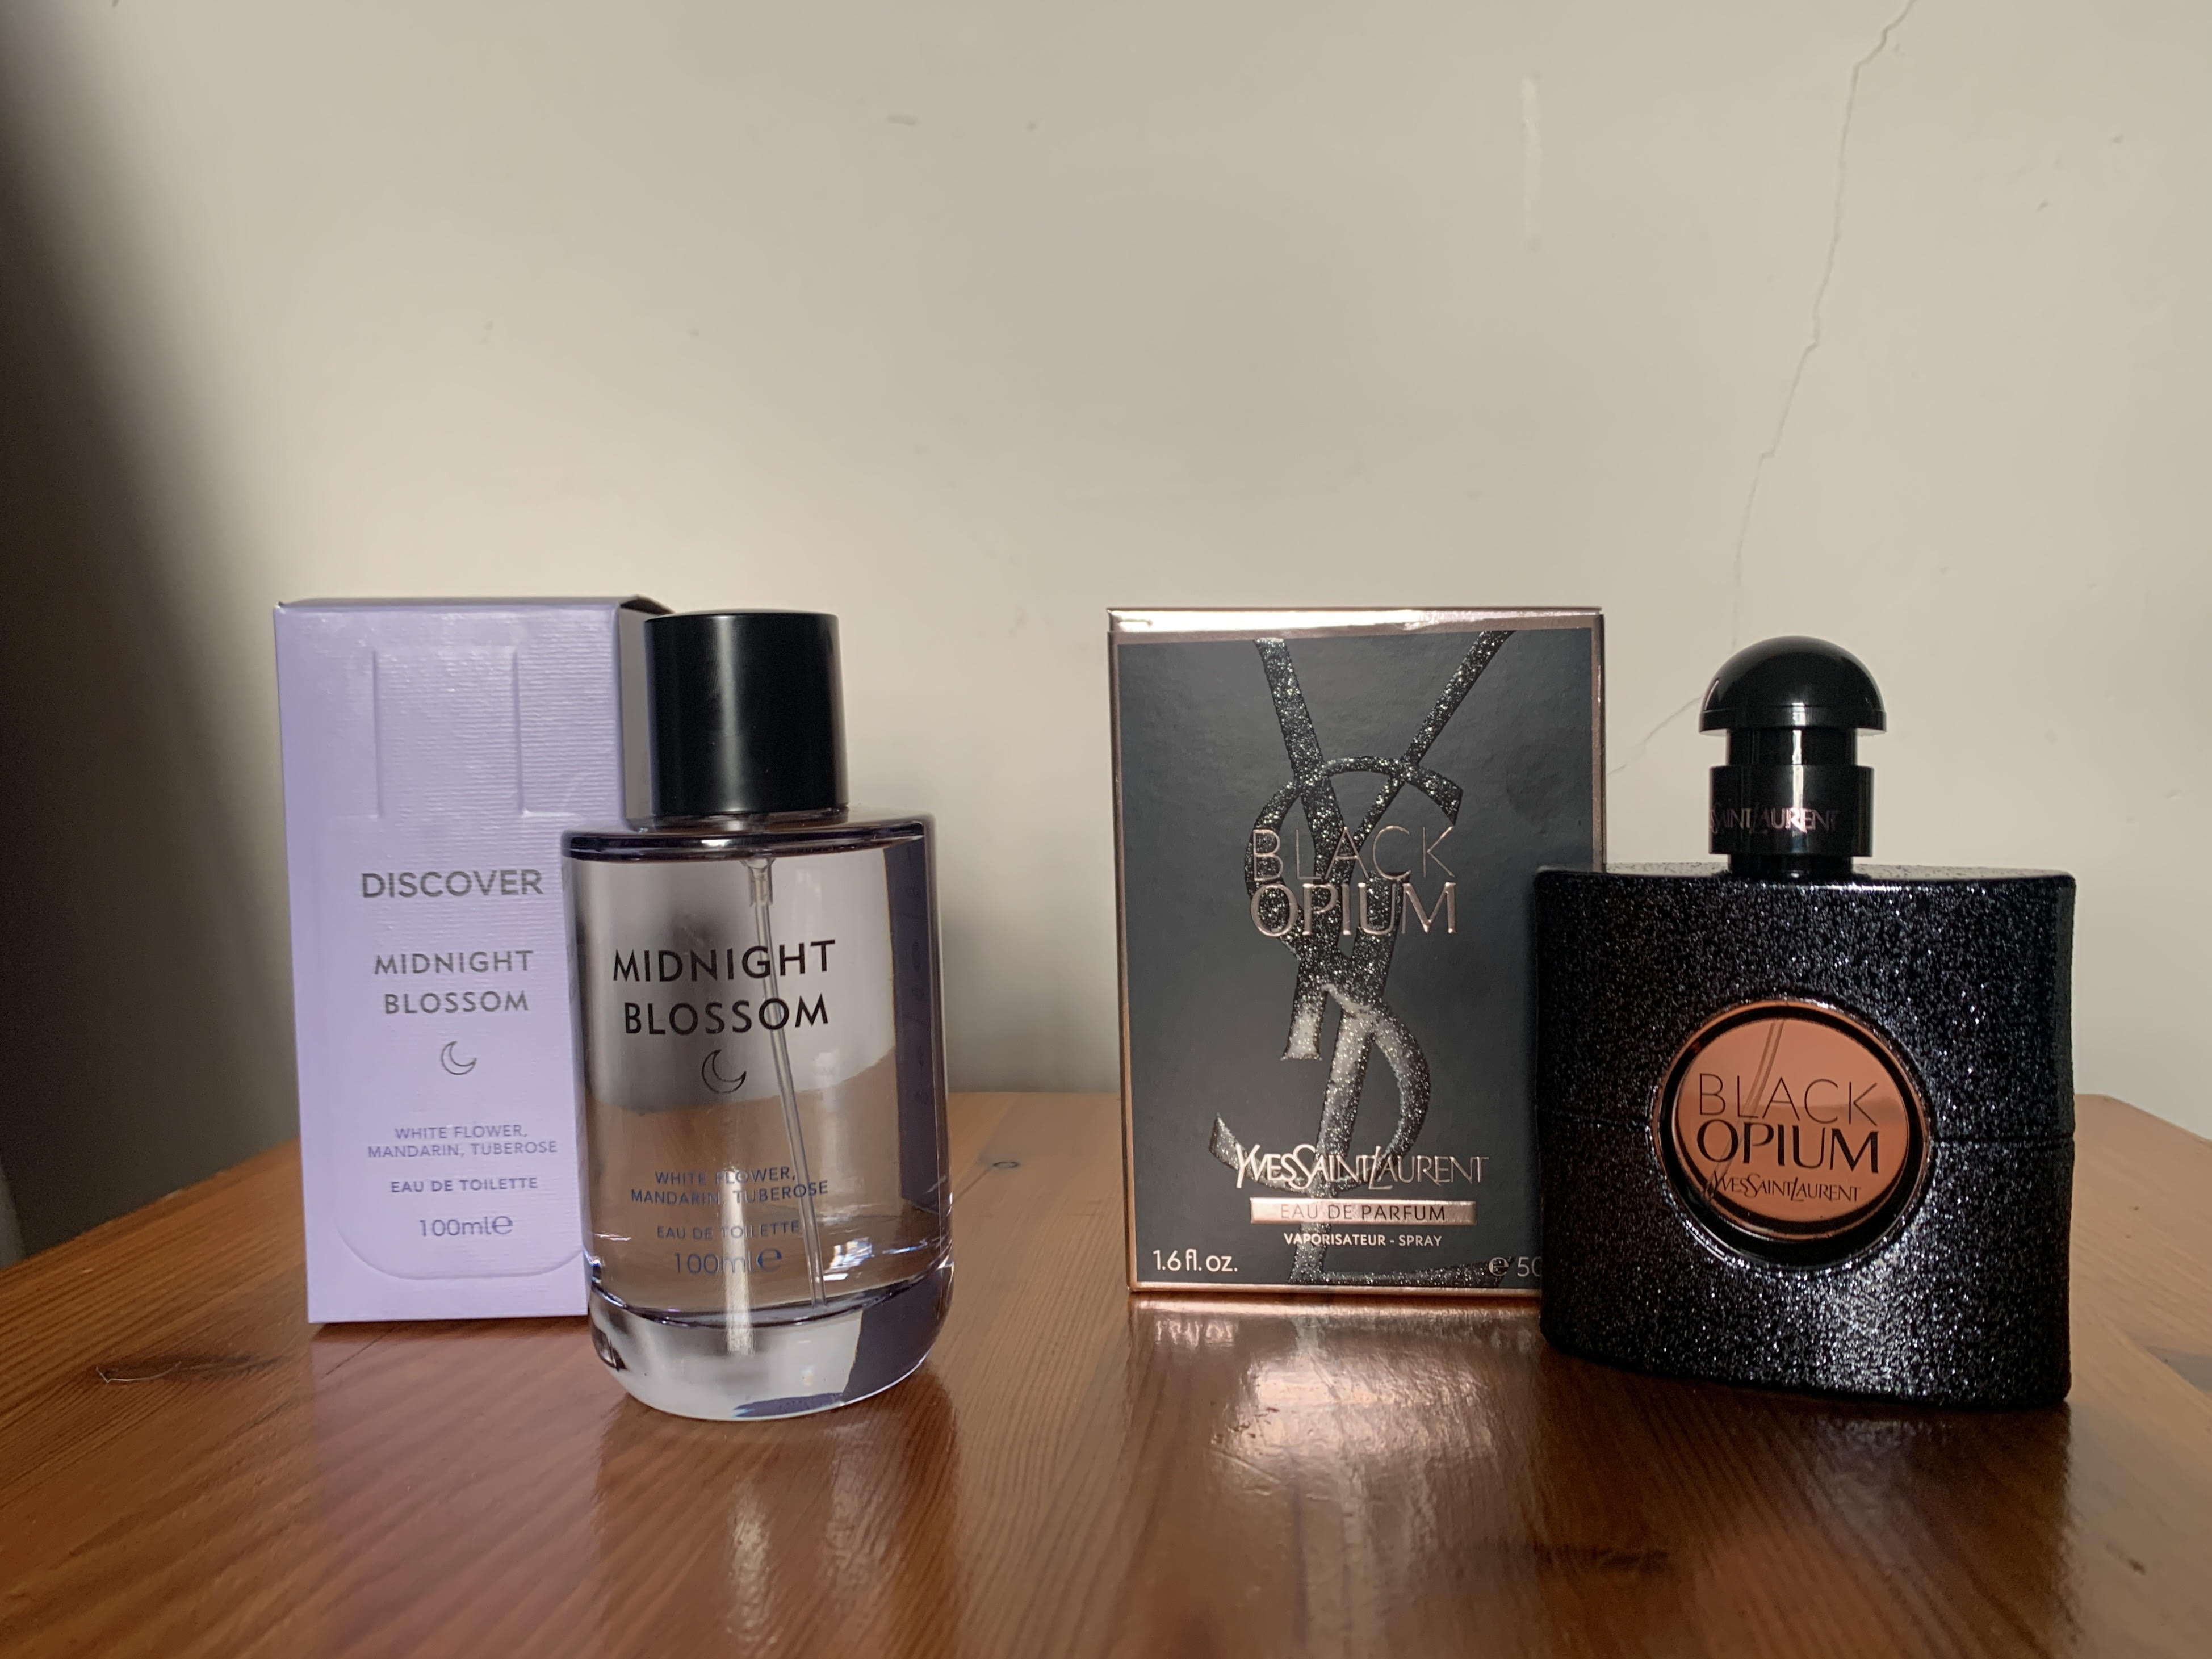 A photo of M&S Midnight Blossom and YSL Black Opium